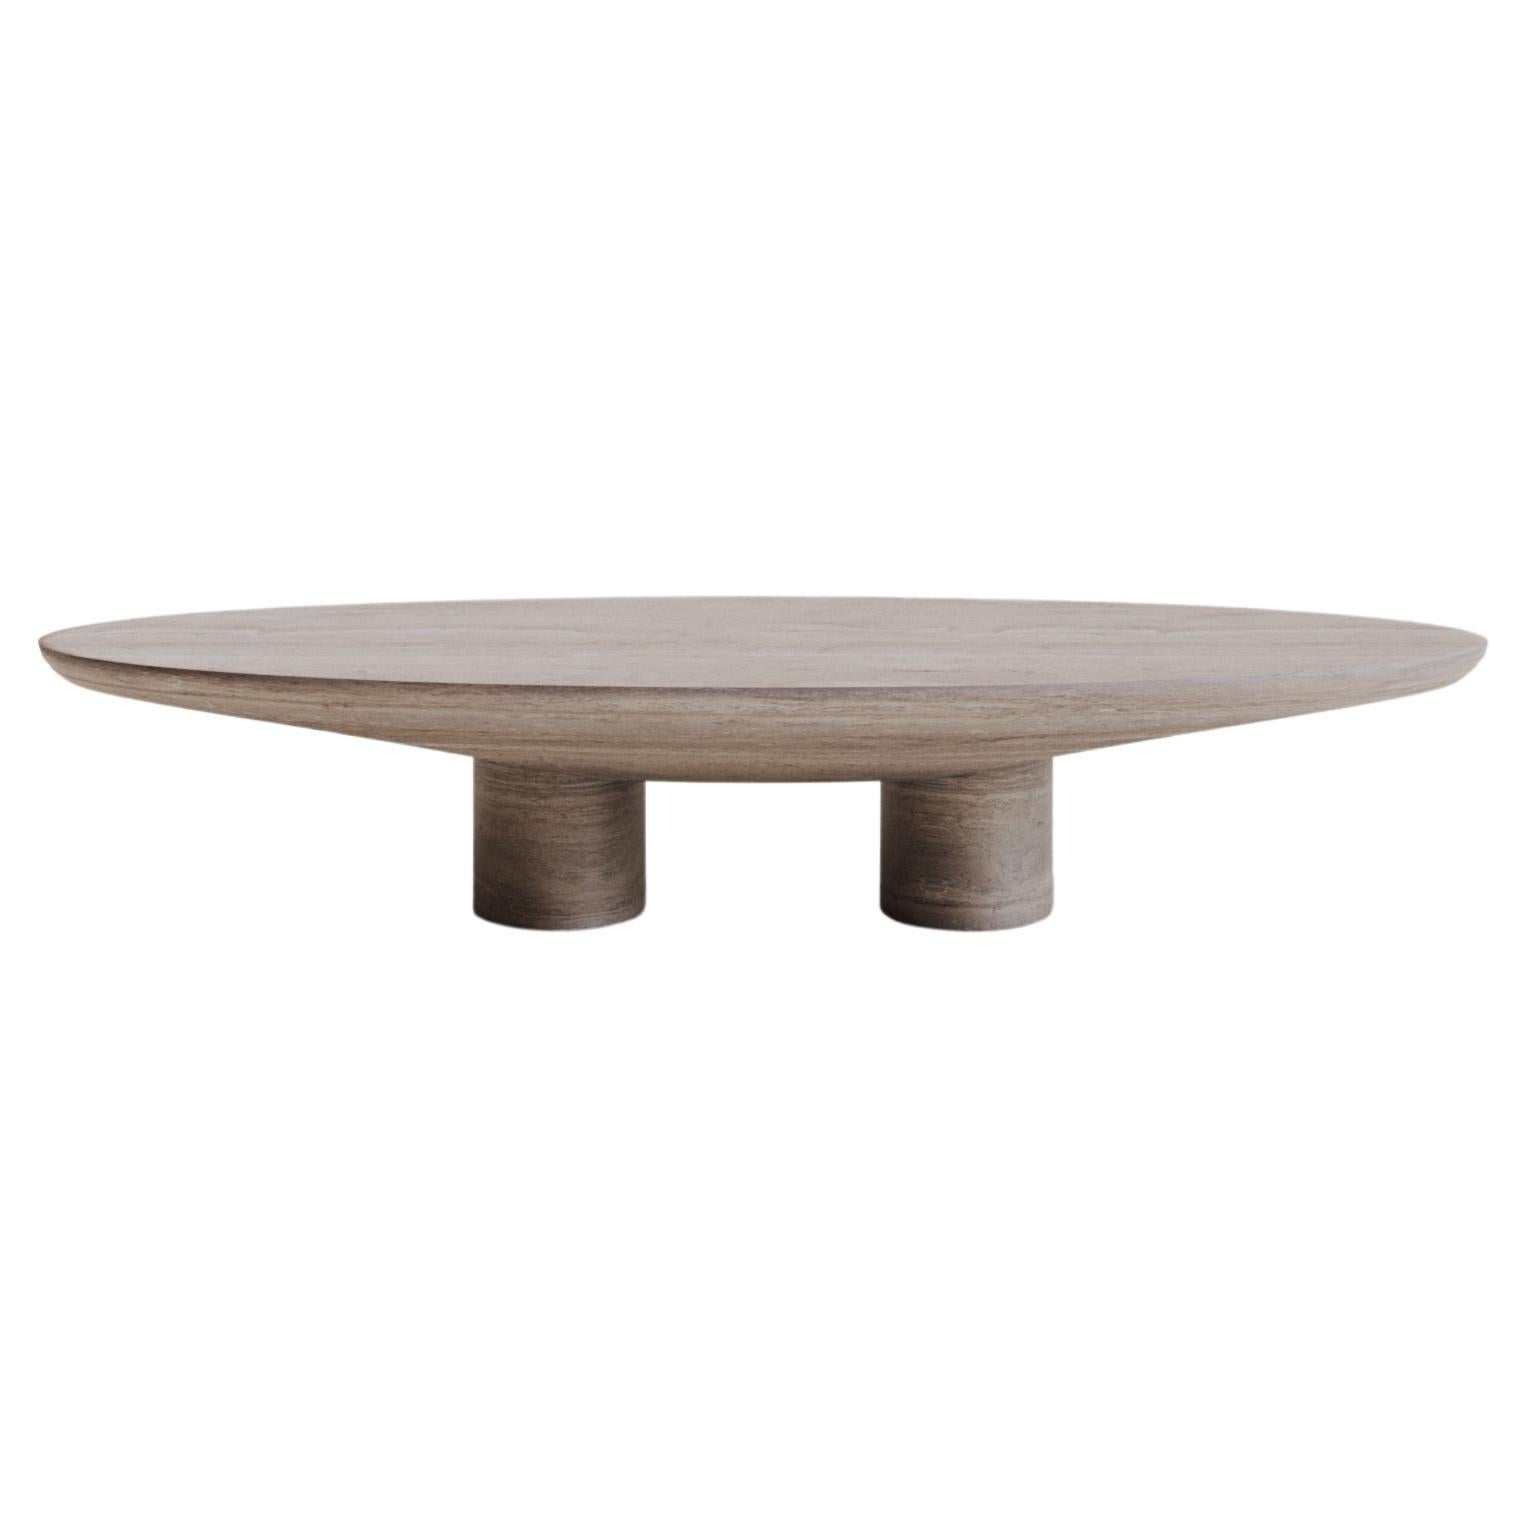 Solid Silver Travertine Oval Coffee Table 140 by Studio Narra For Sale